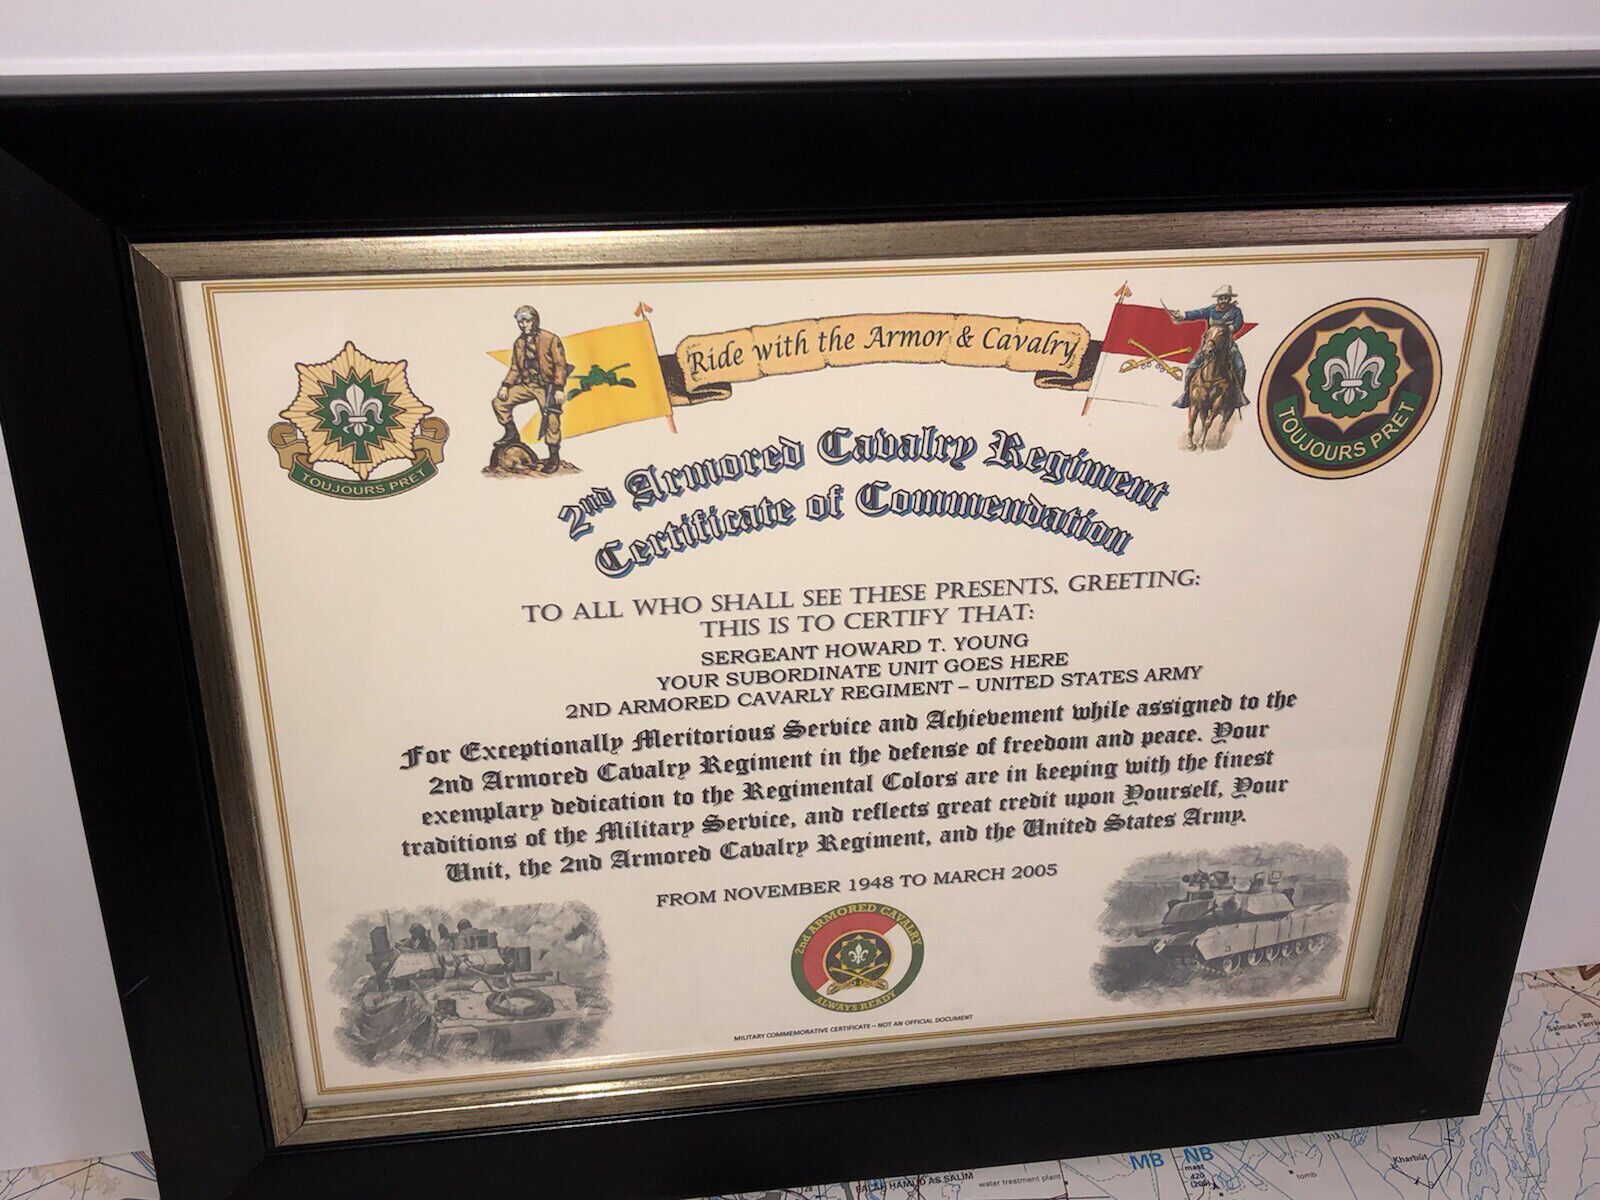 2ND ARMORED CAVALRY REGIMENT / COMMEMORATIVE - CERTIFICATE OF COMMENDATION